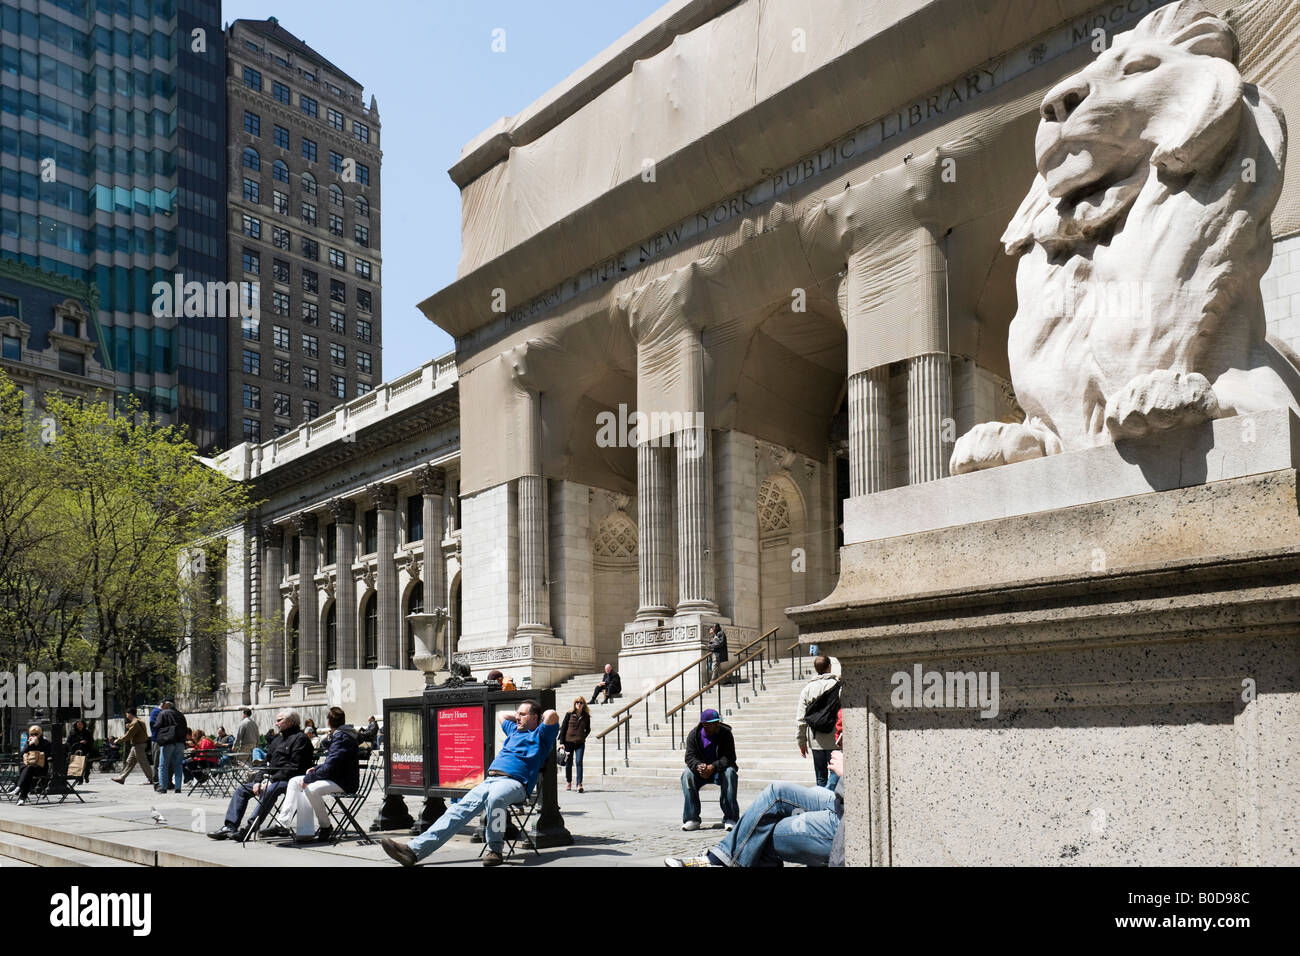 The New York Public Library, Fifth Avenue, NYC, New York City Stock Photo